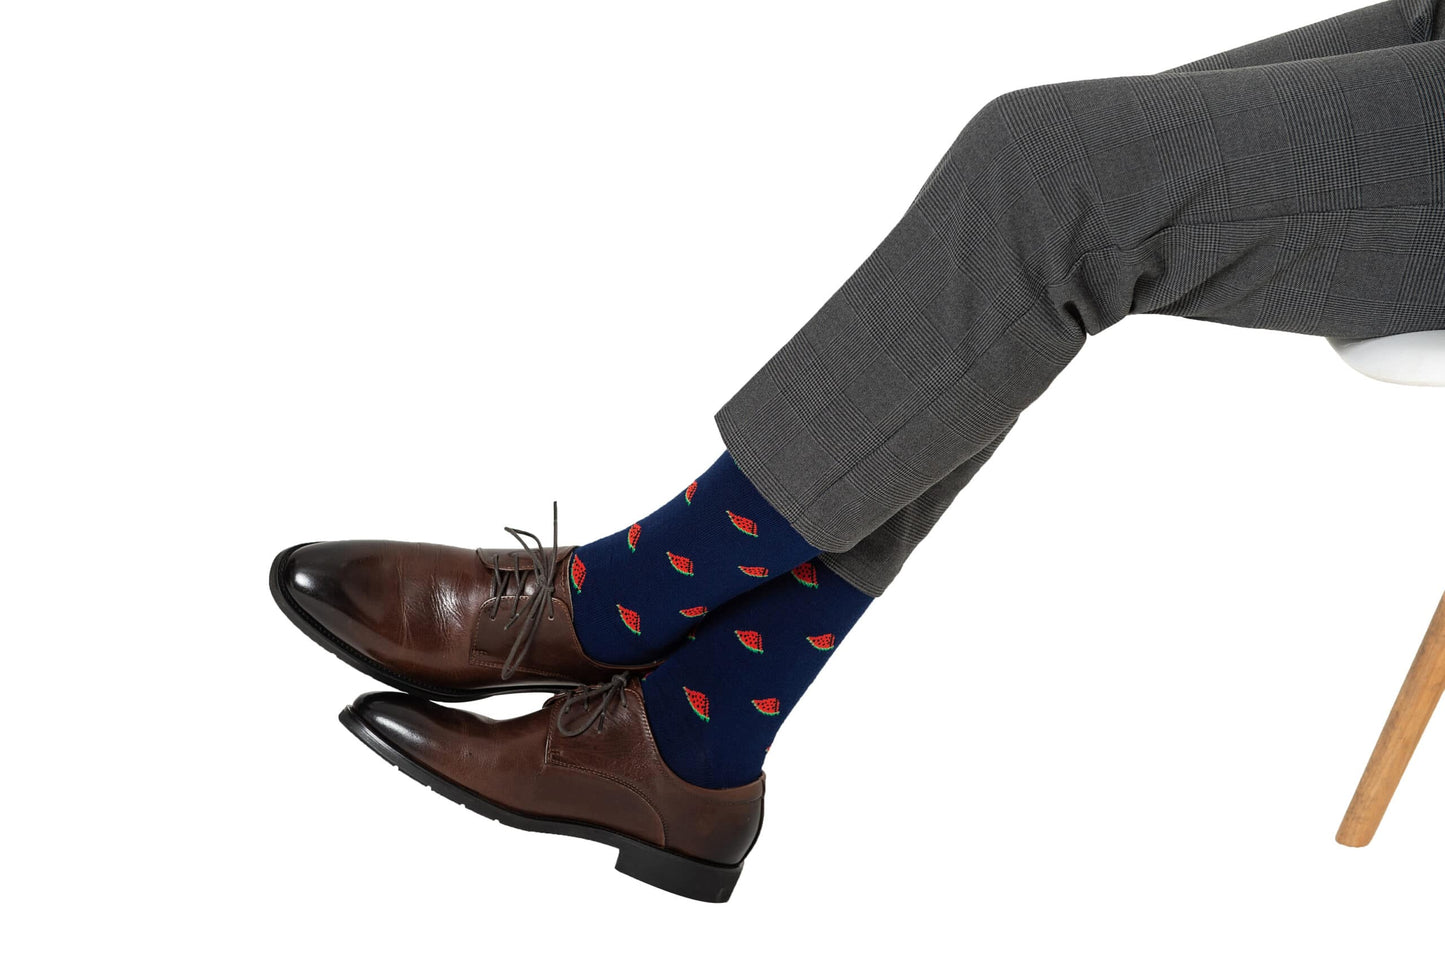 A person in gray trousers and brown leather shoes, with ankles crossed, is taking a step in Watermelon Socks.